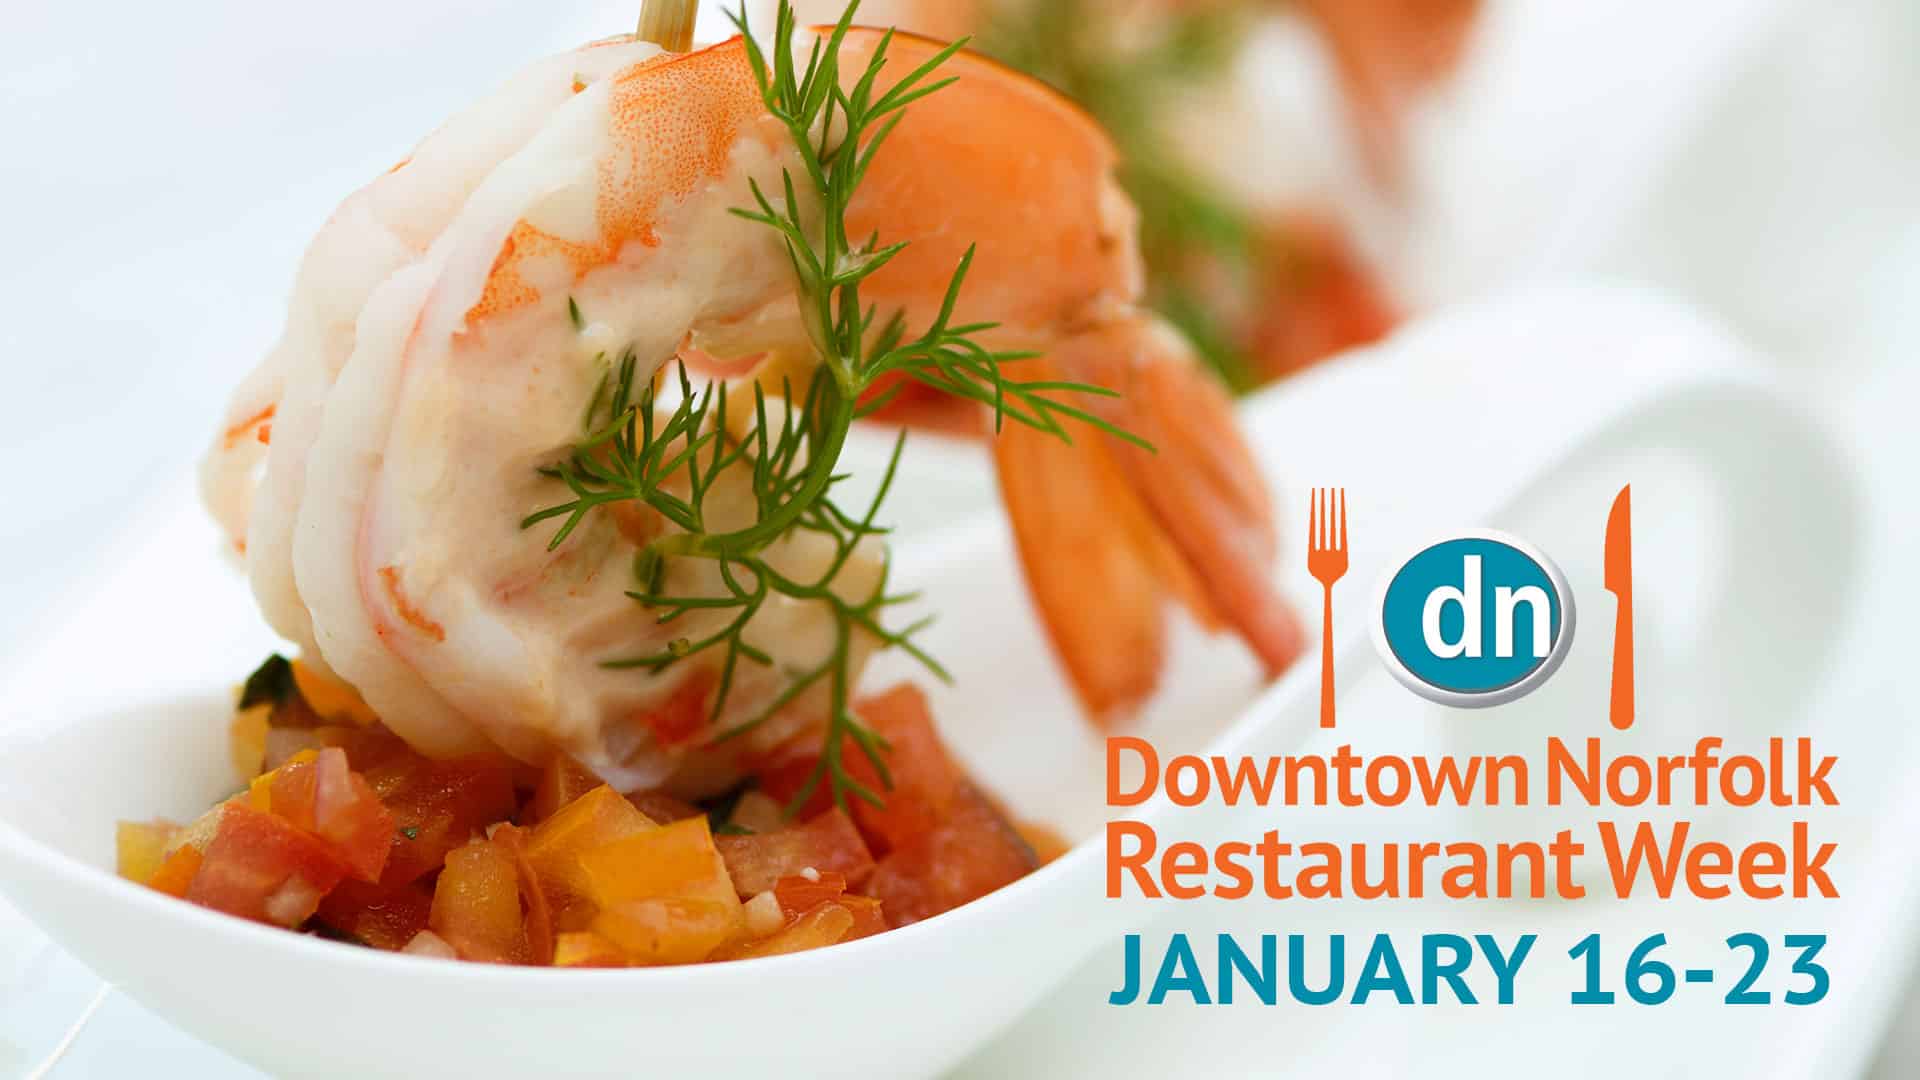 Norfolk Restaurant Week - Enjoying RVA and all it has to offer!